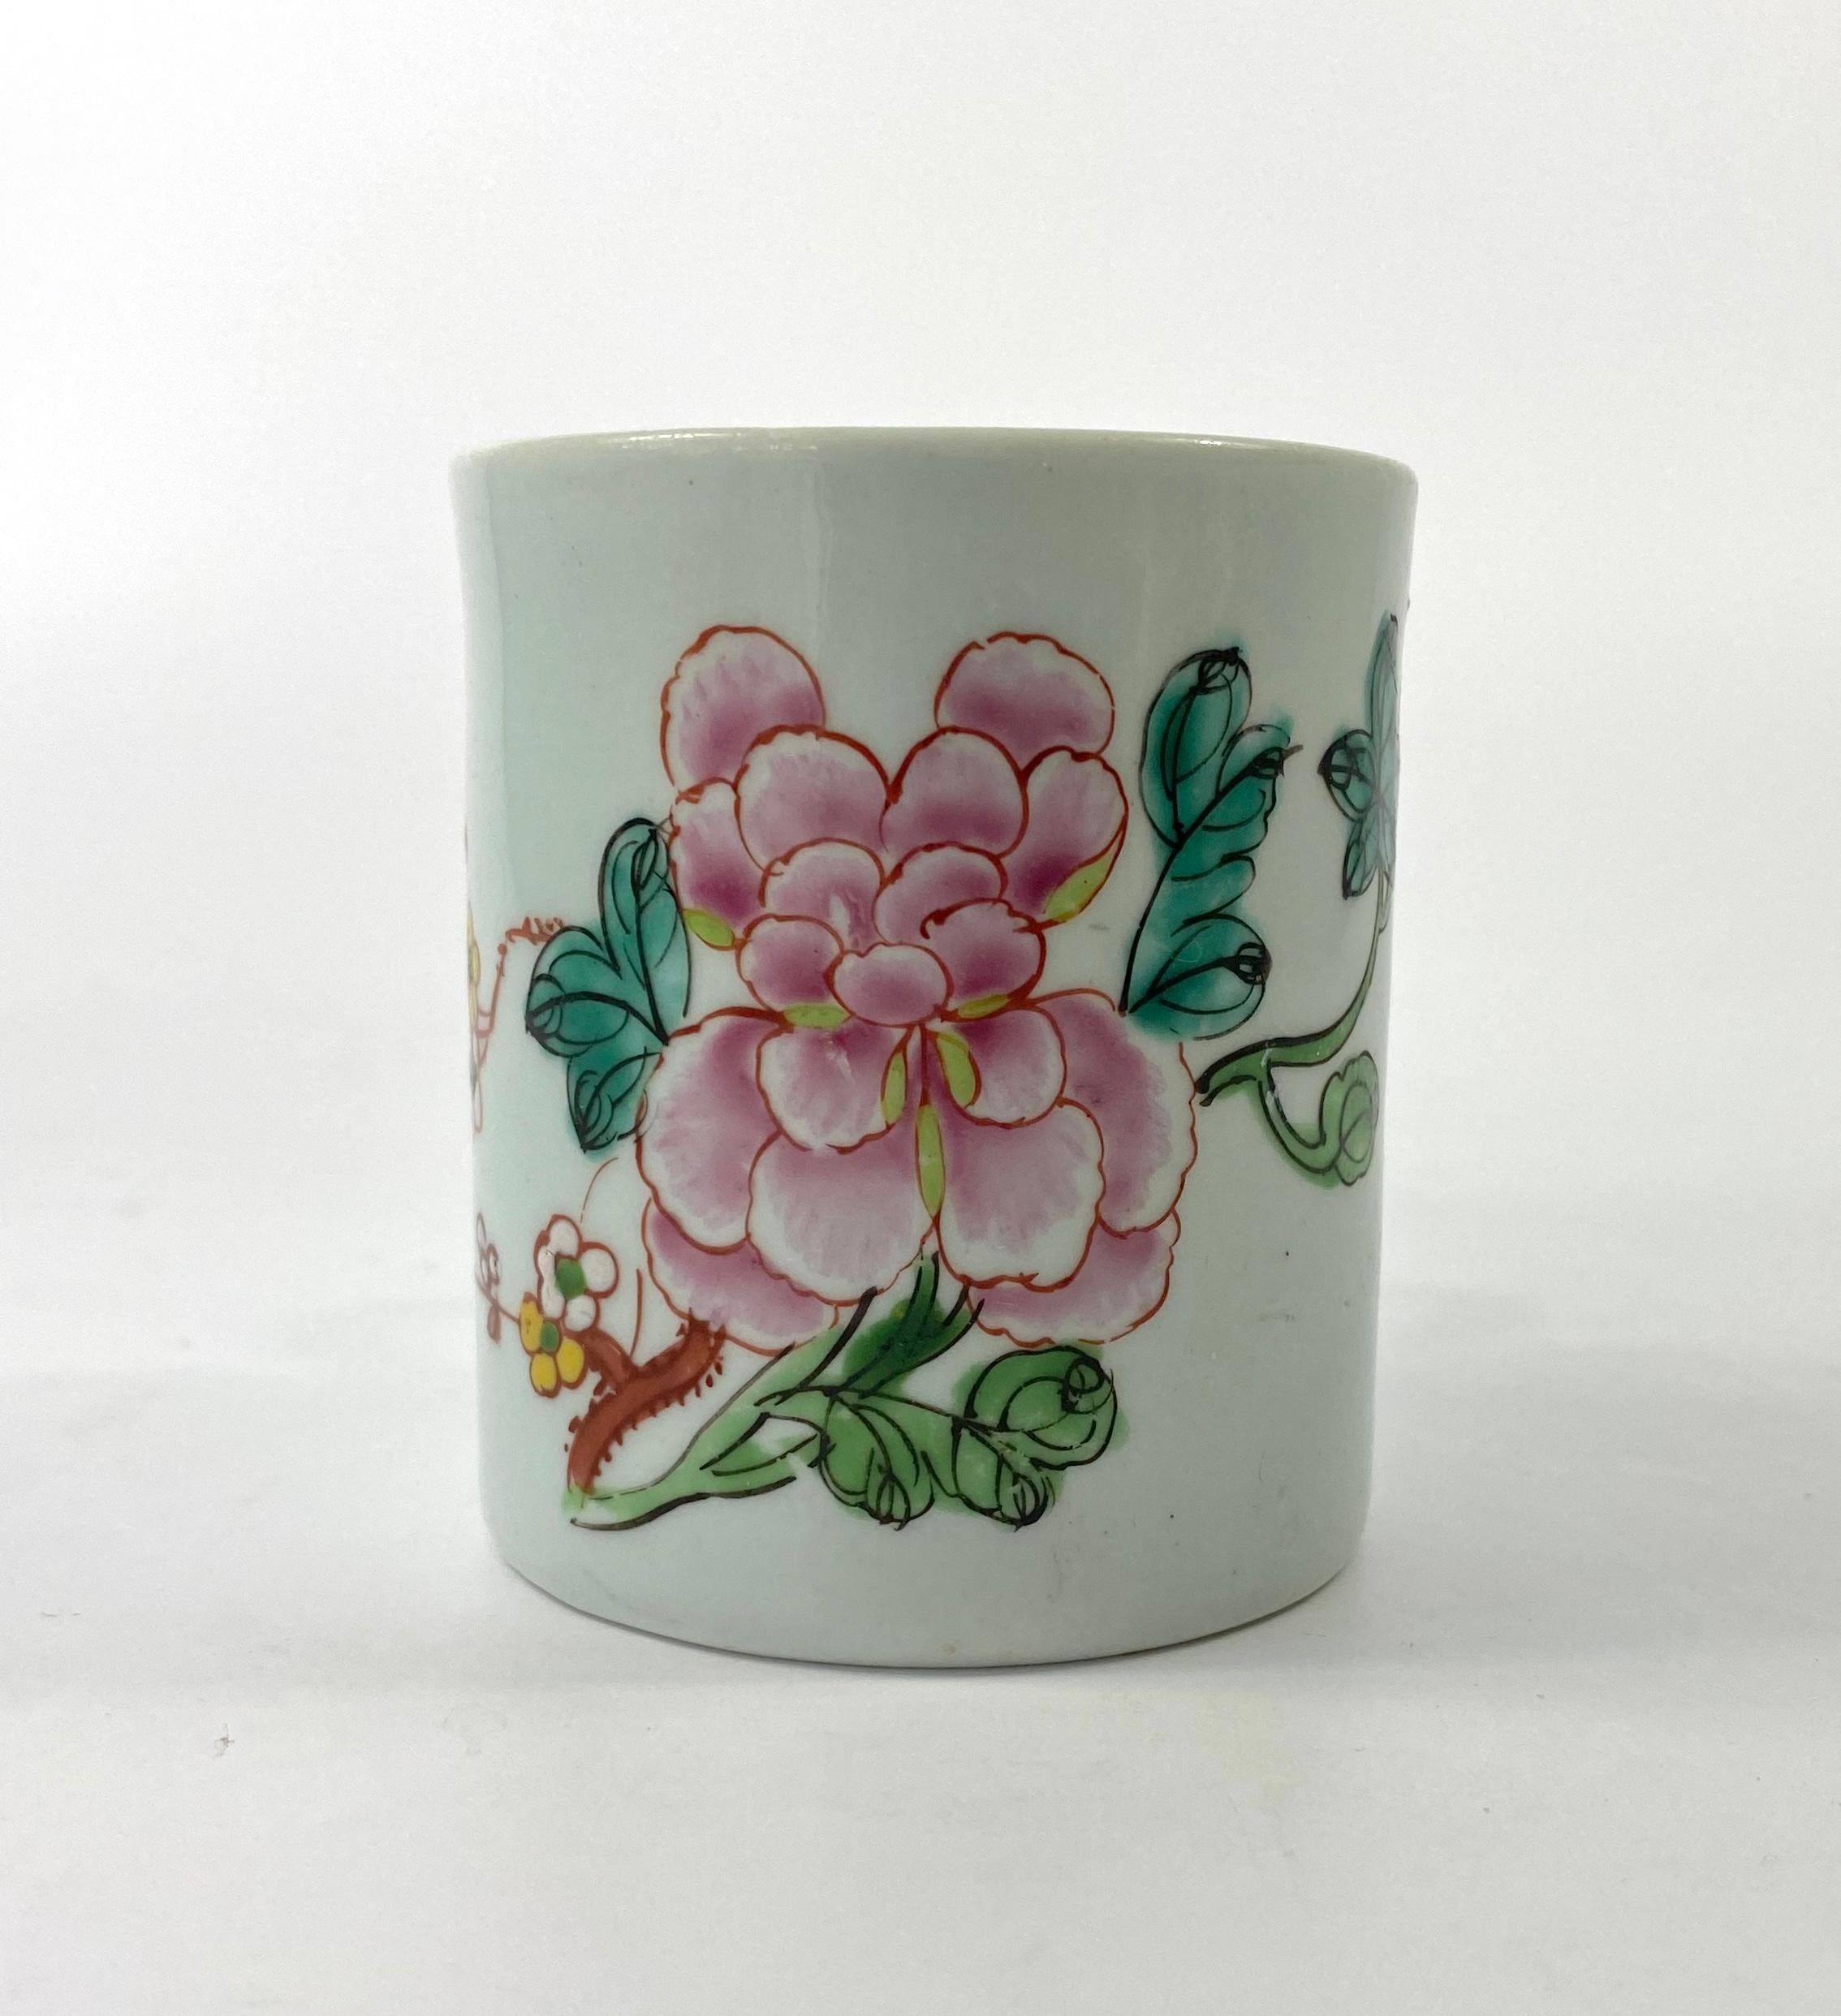 SOLD
Richard Chaffers porcelain coffee can, c. 1758. Beautifully hand painted in vibrant enamels, with a flowering plants, in Chinese famille rose style. Having a simple loop handle, and an unglazed base.
Having a very distinct green tinge to the